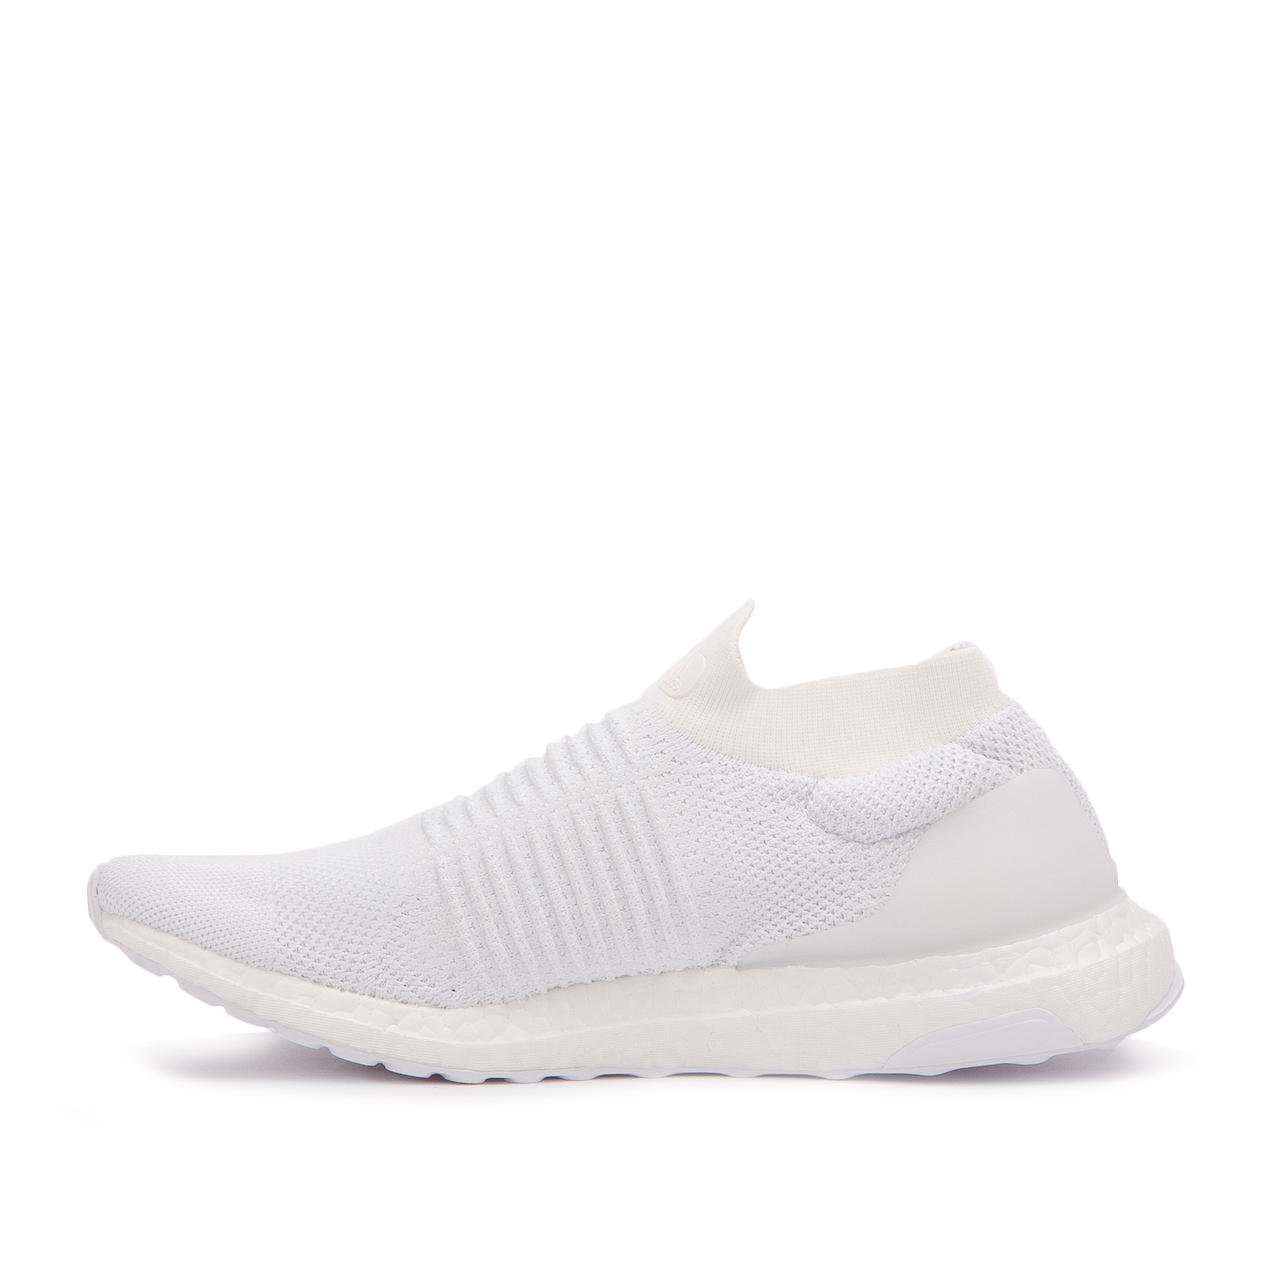 adidas Rubber Ultra Boost Laceless "triple White" for Men - Lyst